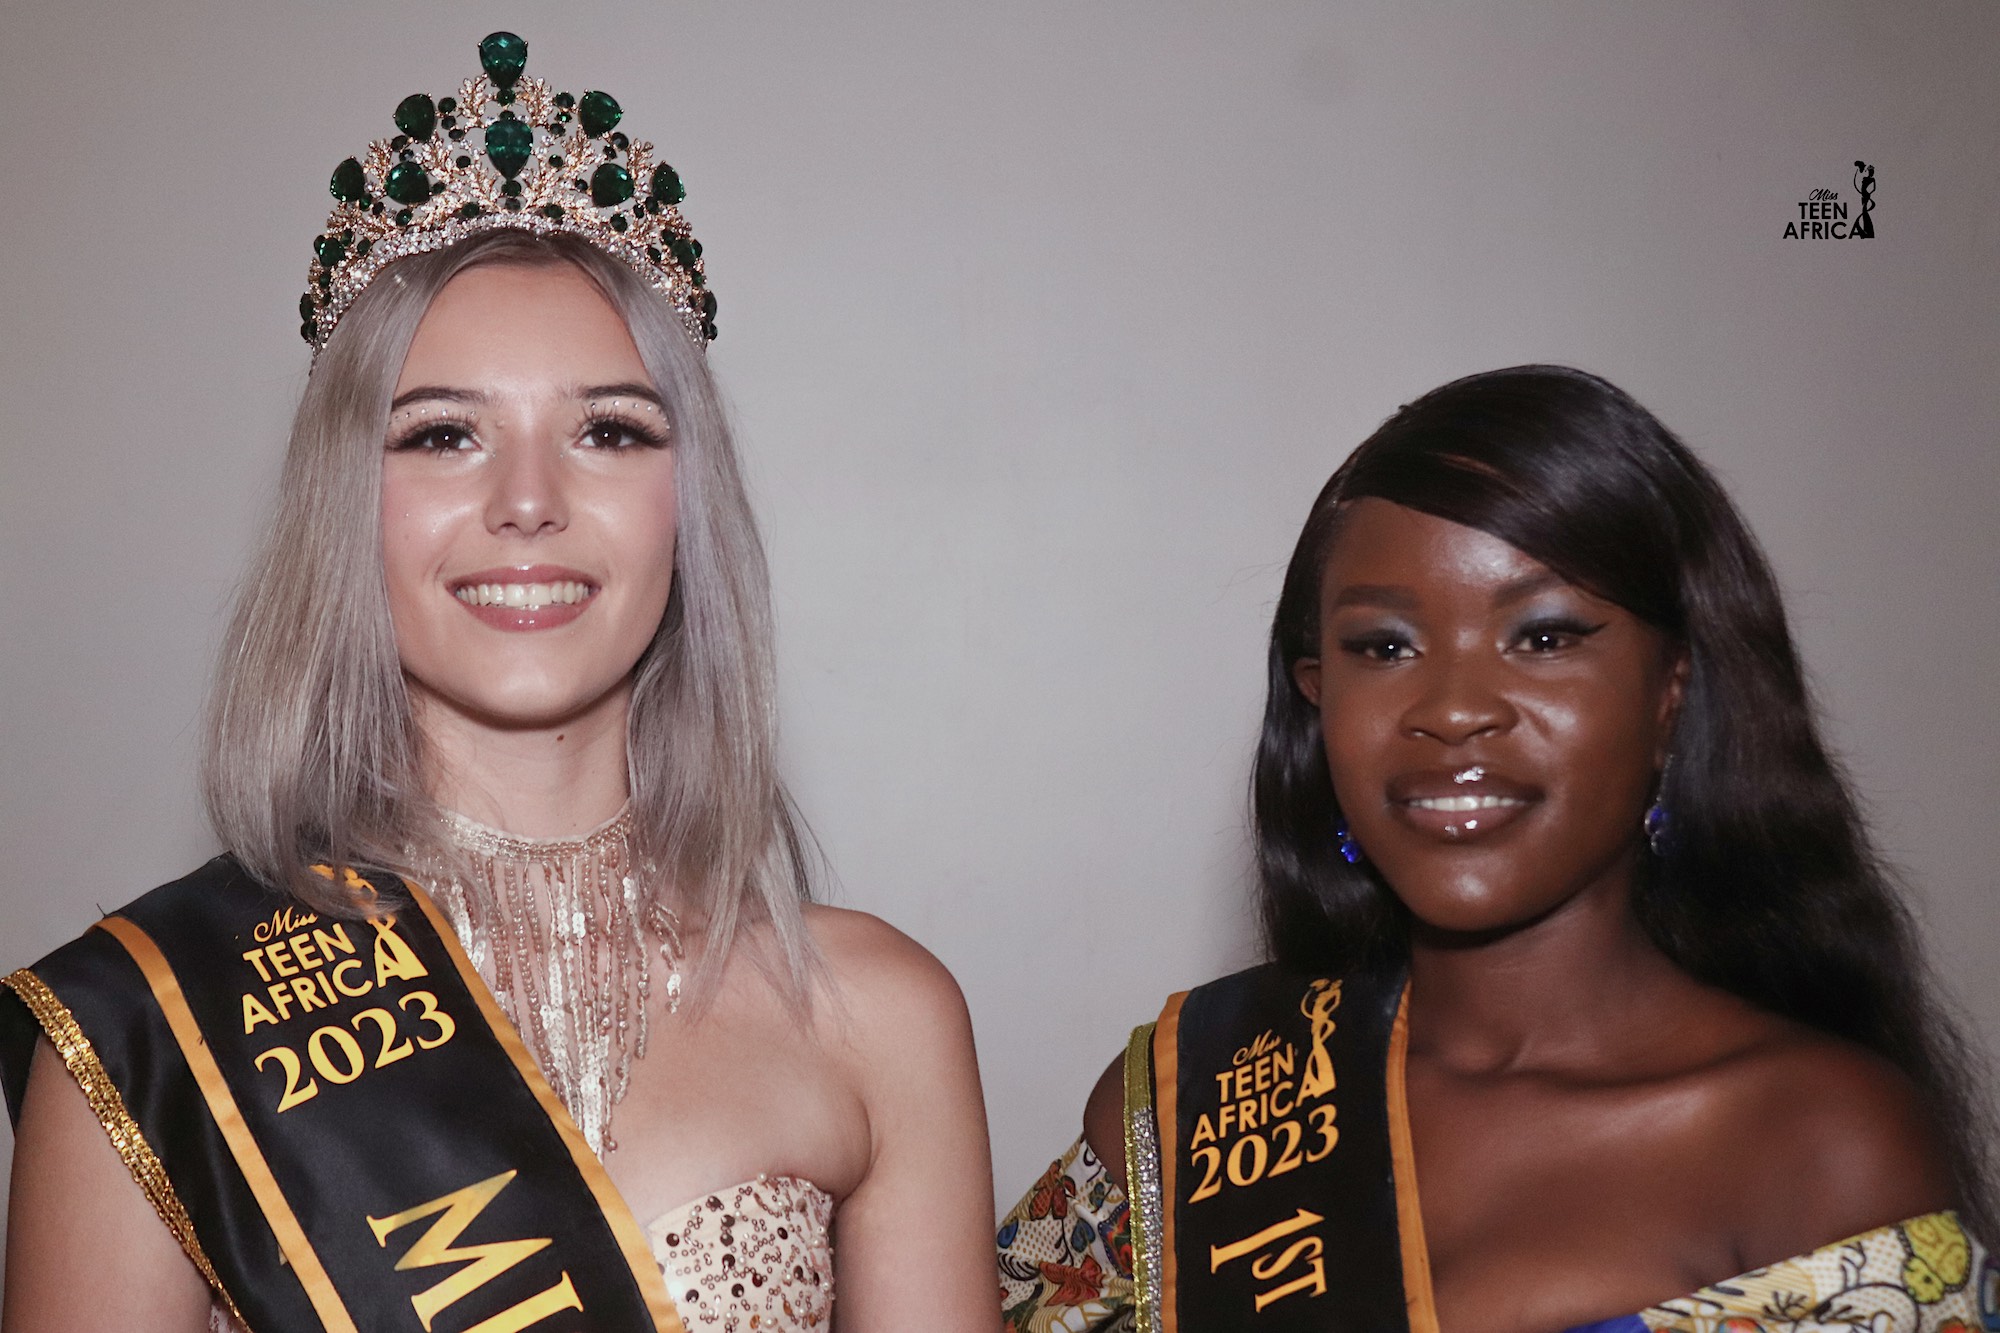 Anca Smith crowned the new Miss Teen Africa - Miss Teen Africa